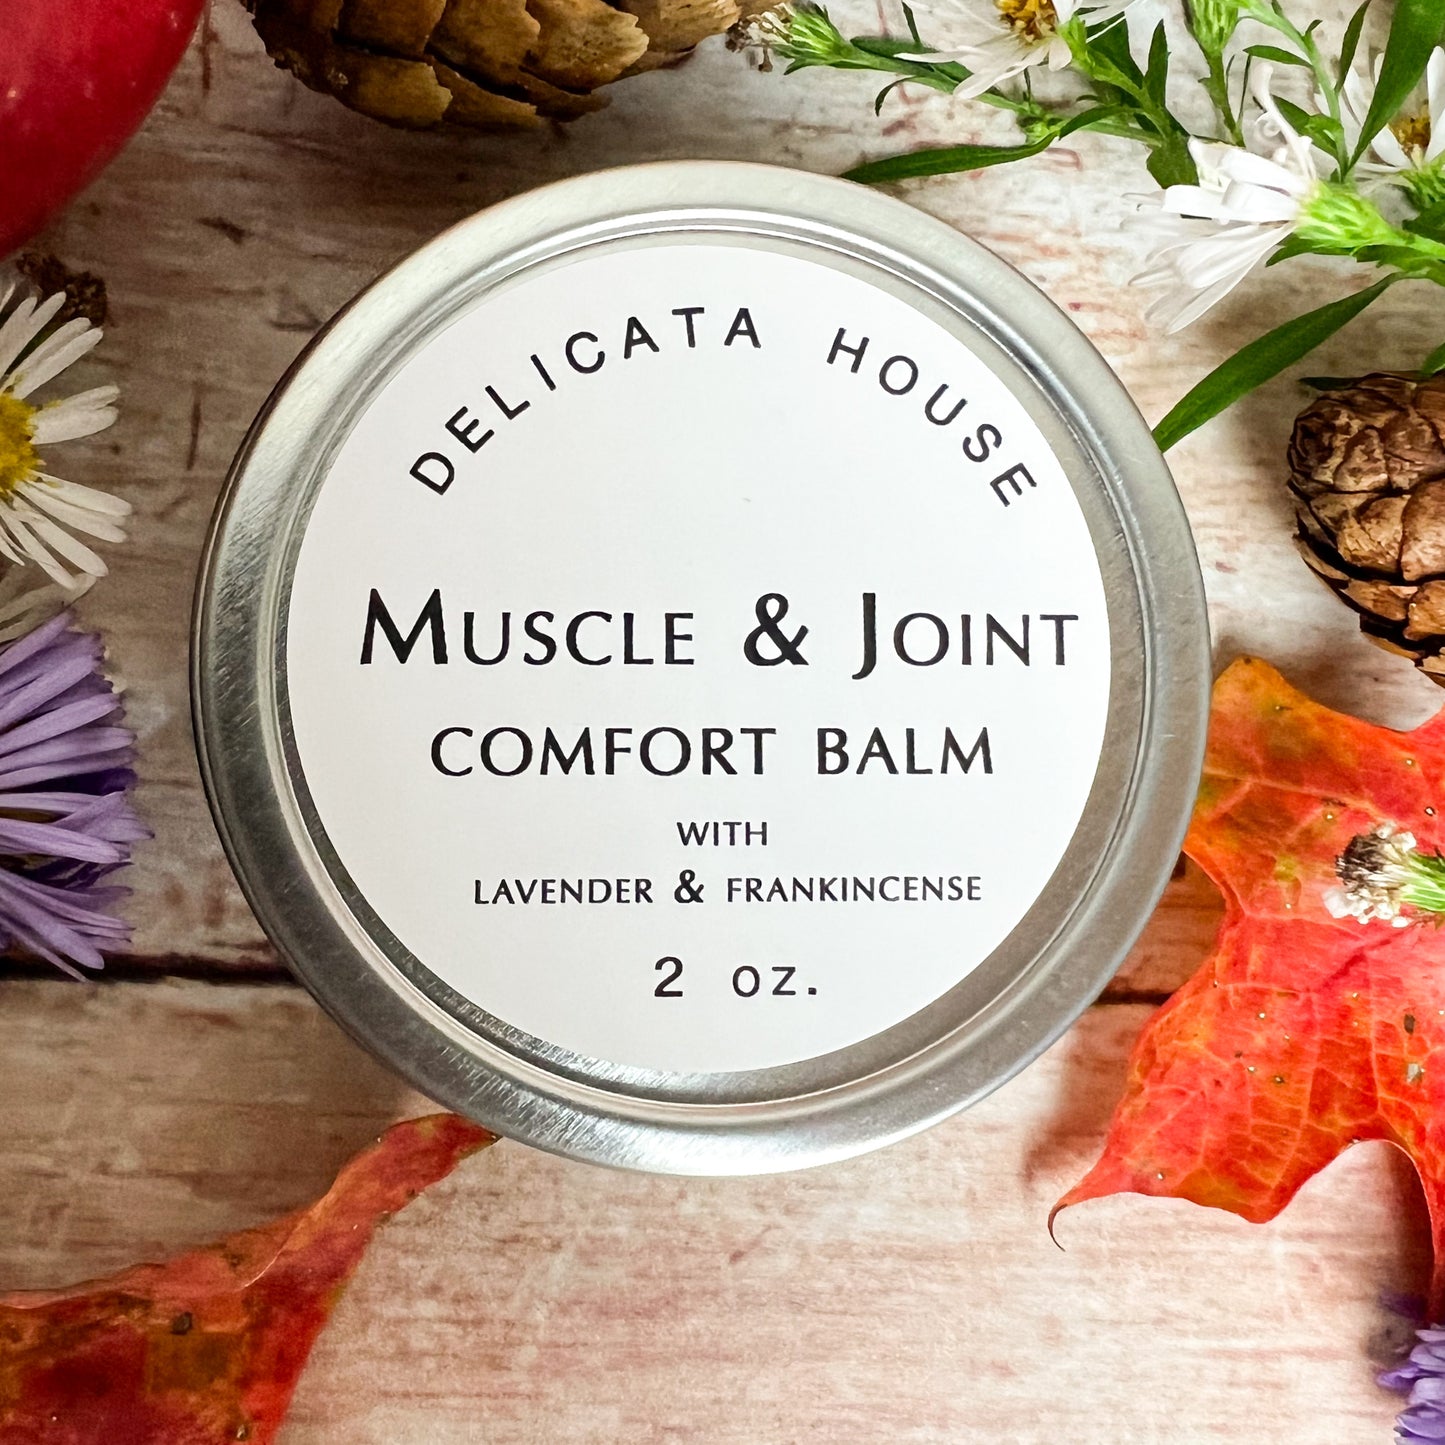 Muscle & Joint Comfort Balm 2oz. - Muscle Rub - Pain Relief Balm - Sore Muscle Rub - Joint Balm